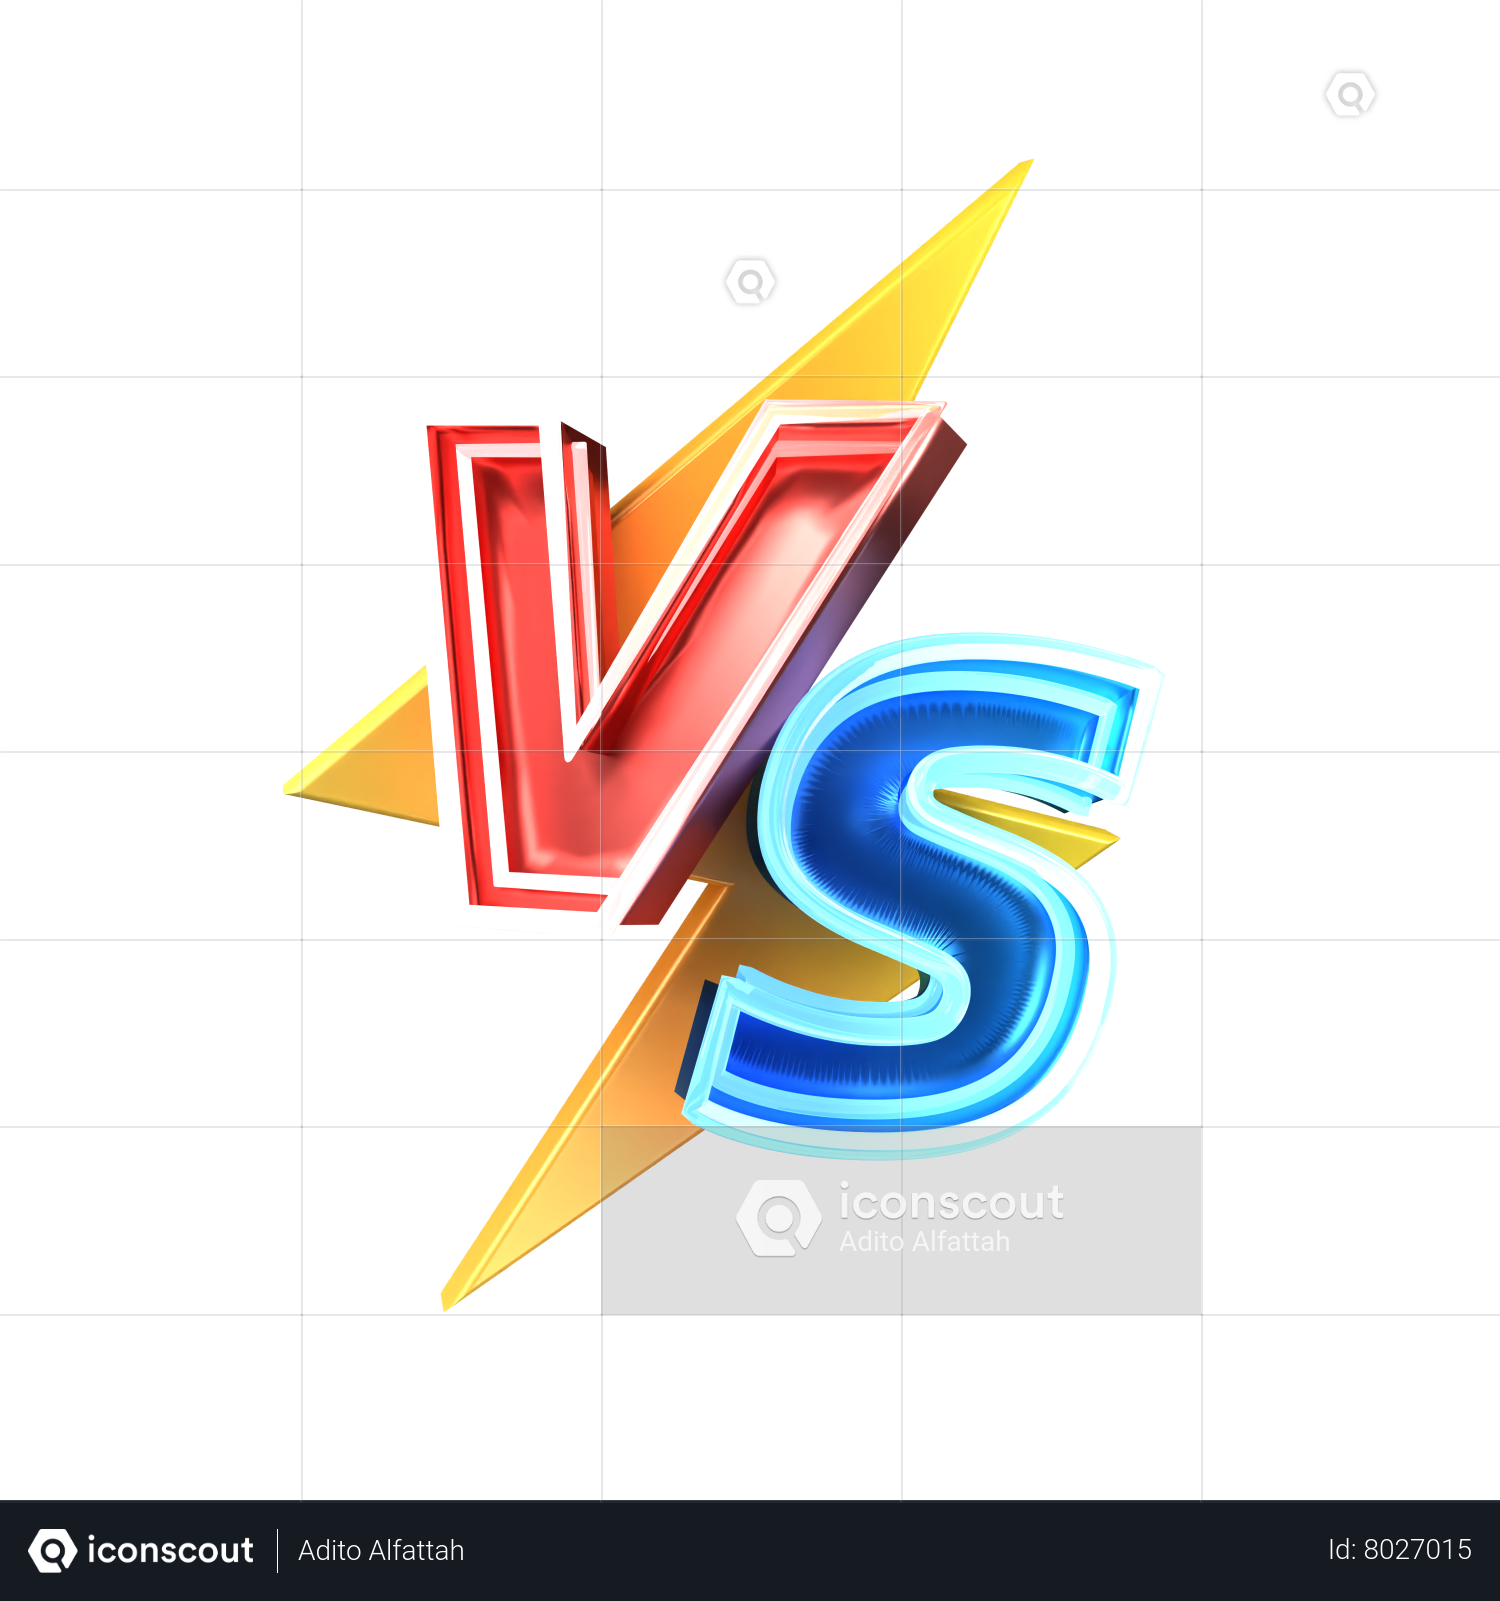 Versus Vs Vector Transparent Background Graphic by ss graphic studio ·  Creative Fabrica